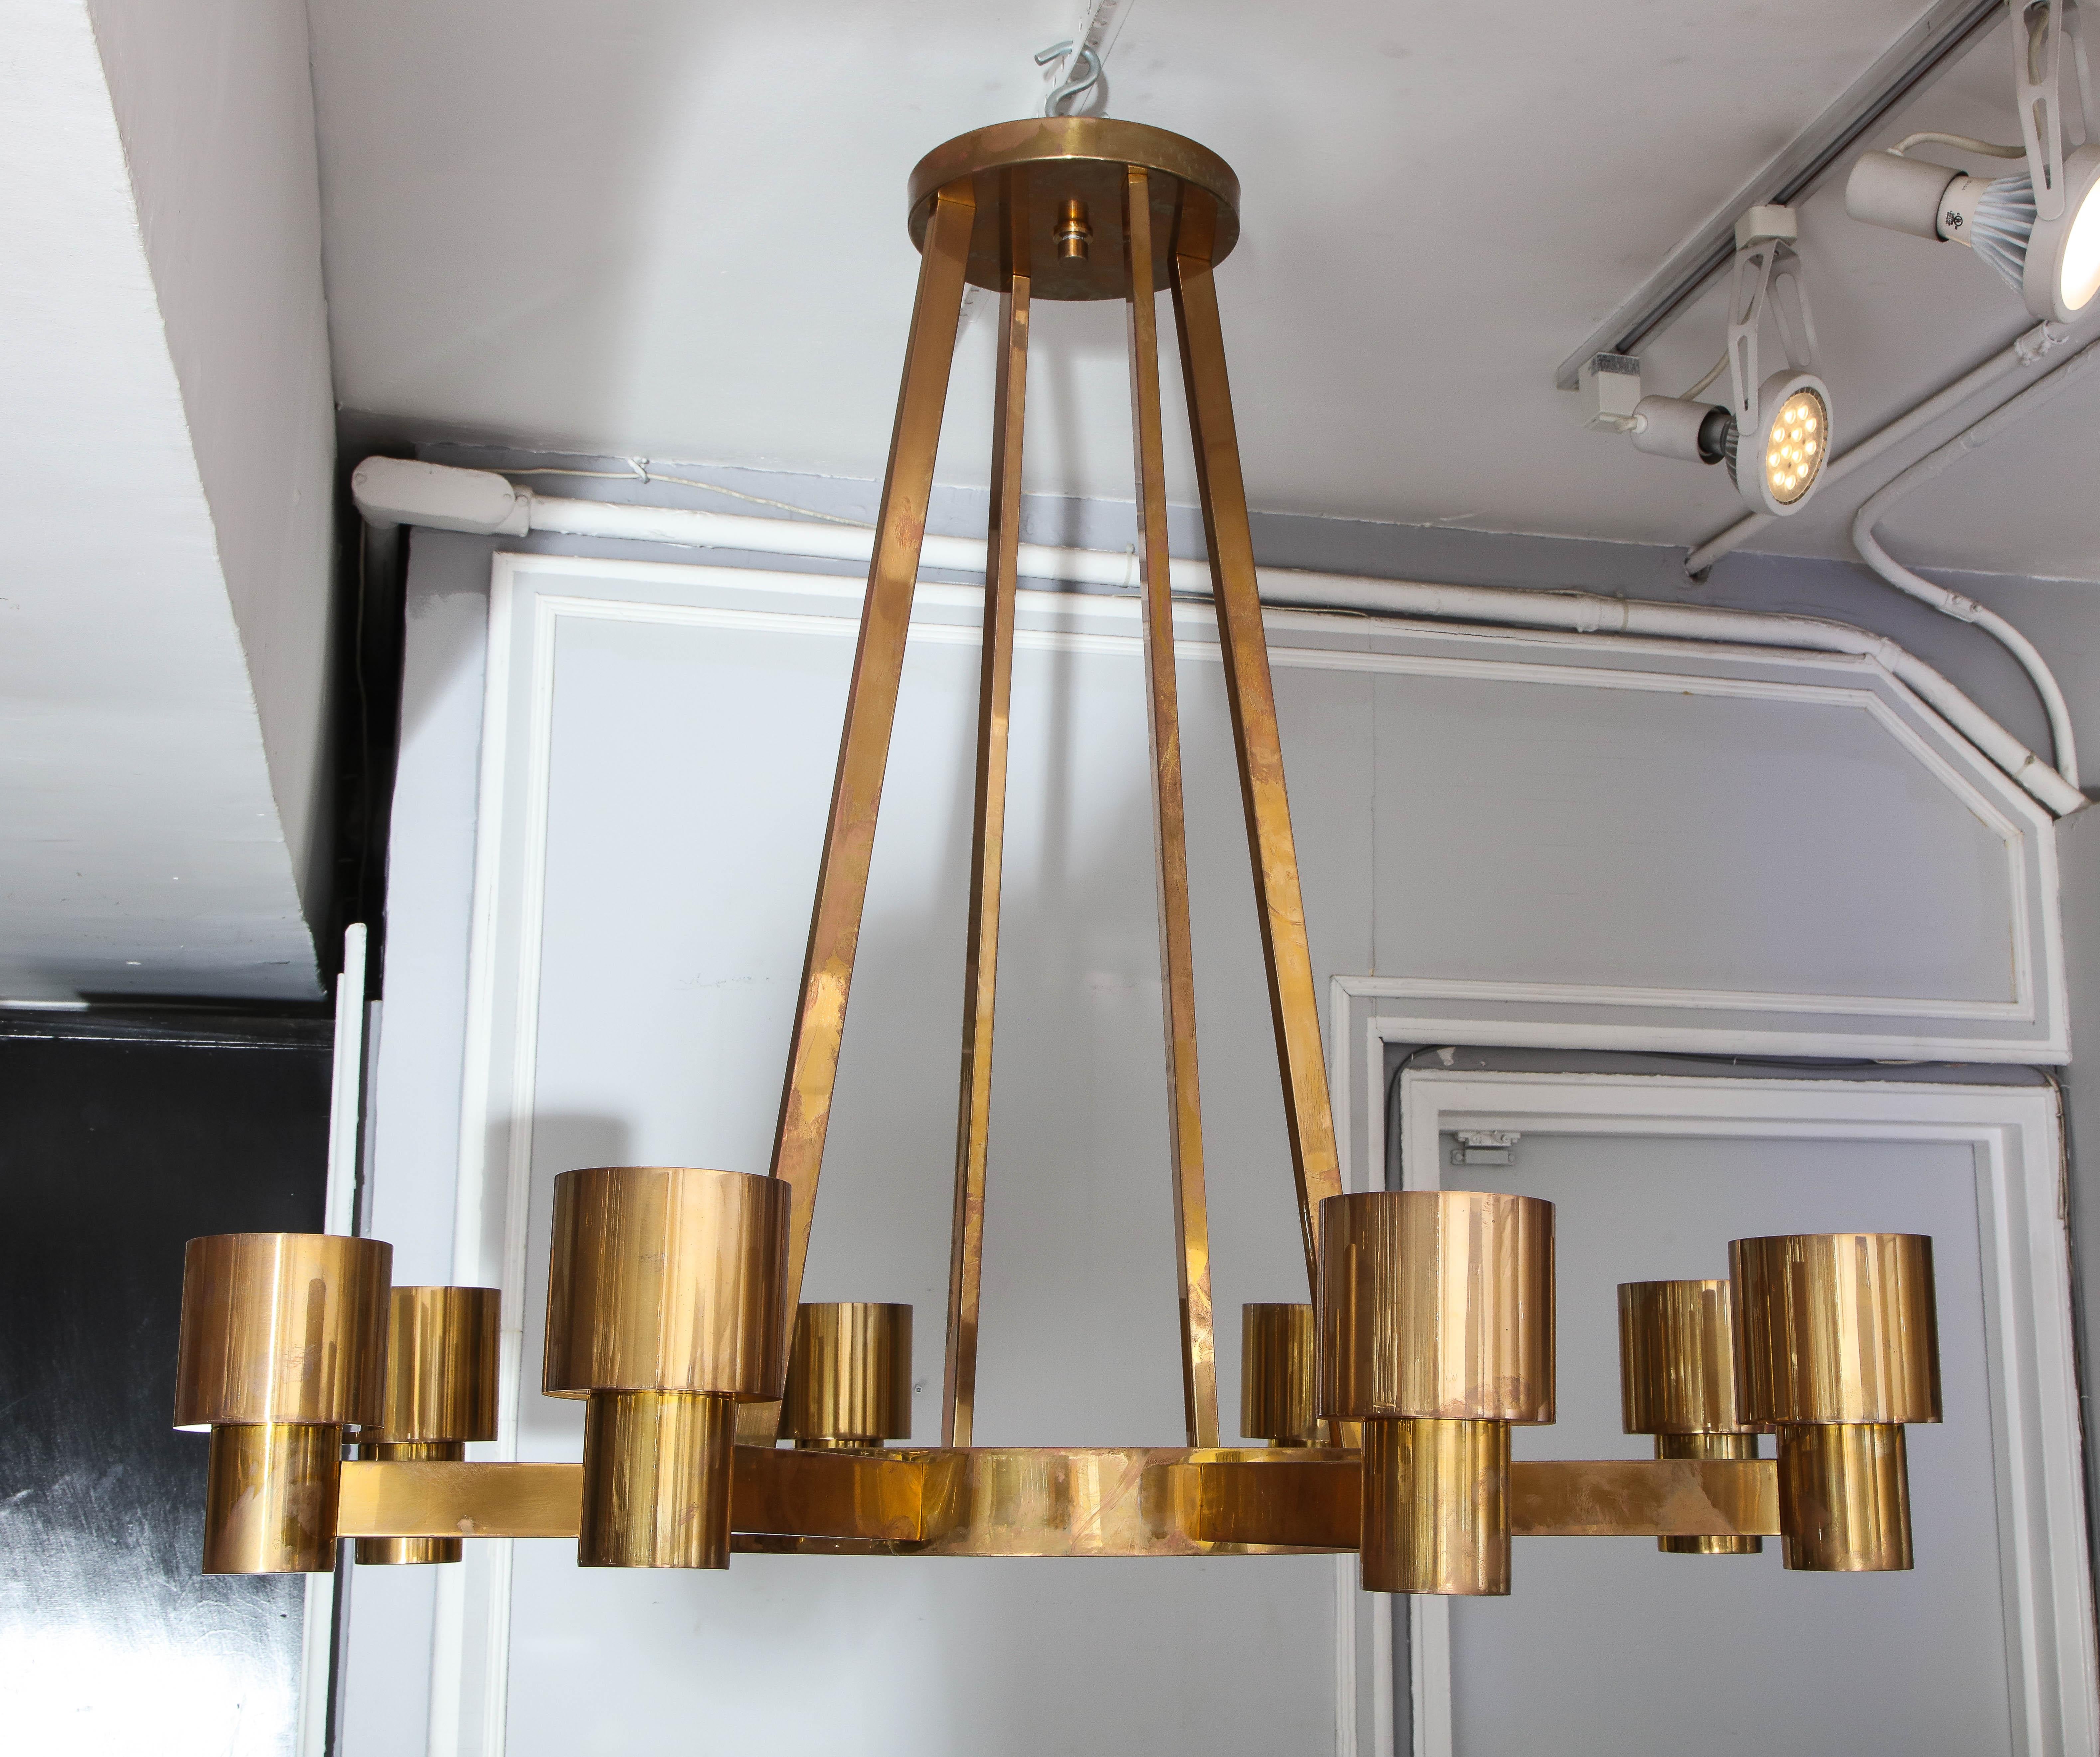 Custom sculptural brass chandelier with eight arms.
This chandelier is custom made. The turnaround time is 8-10 weeks.